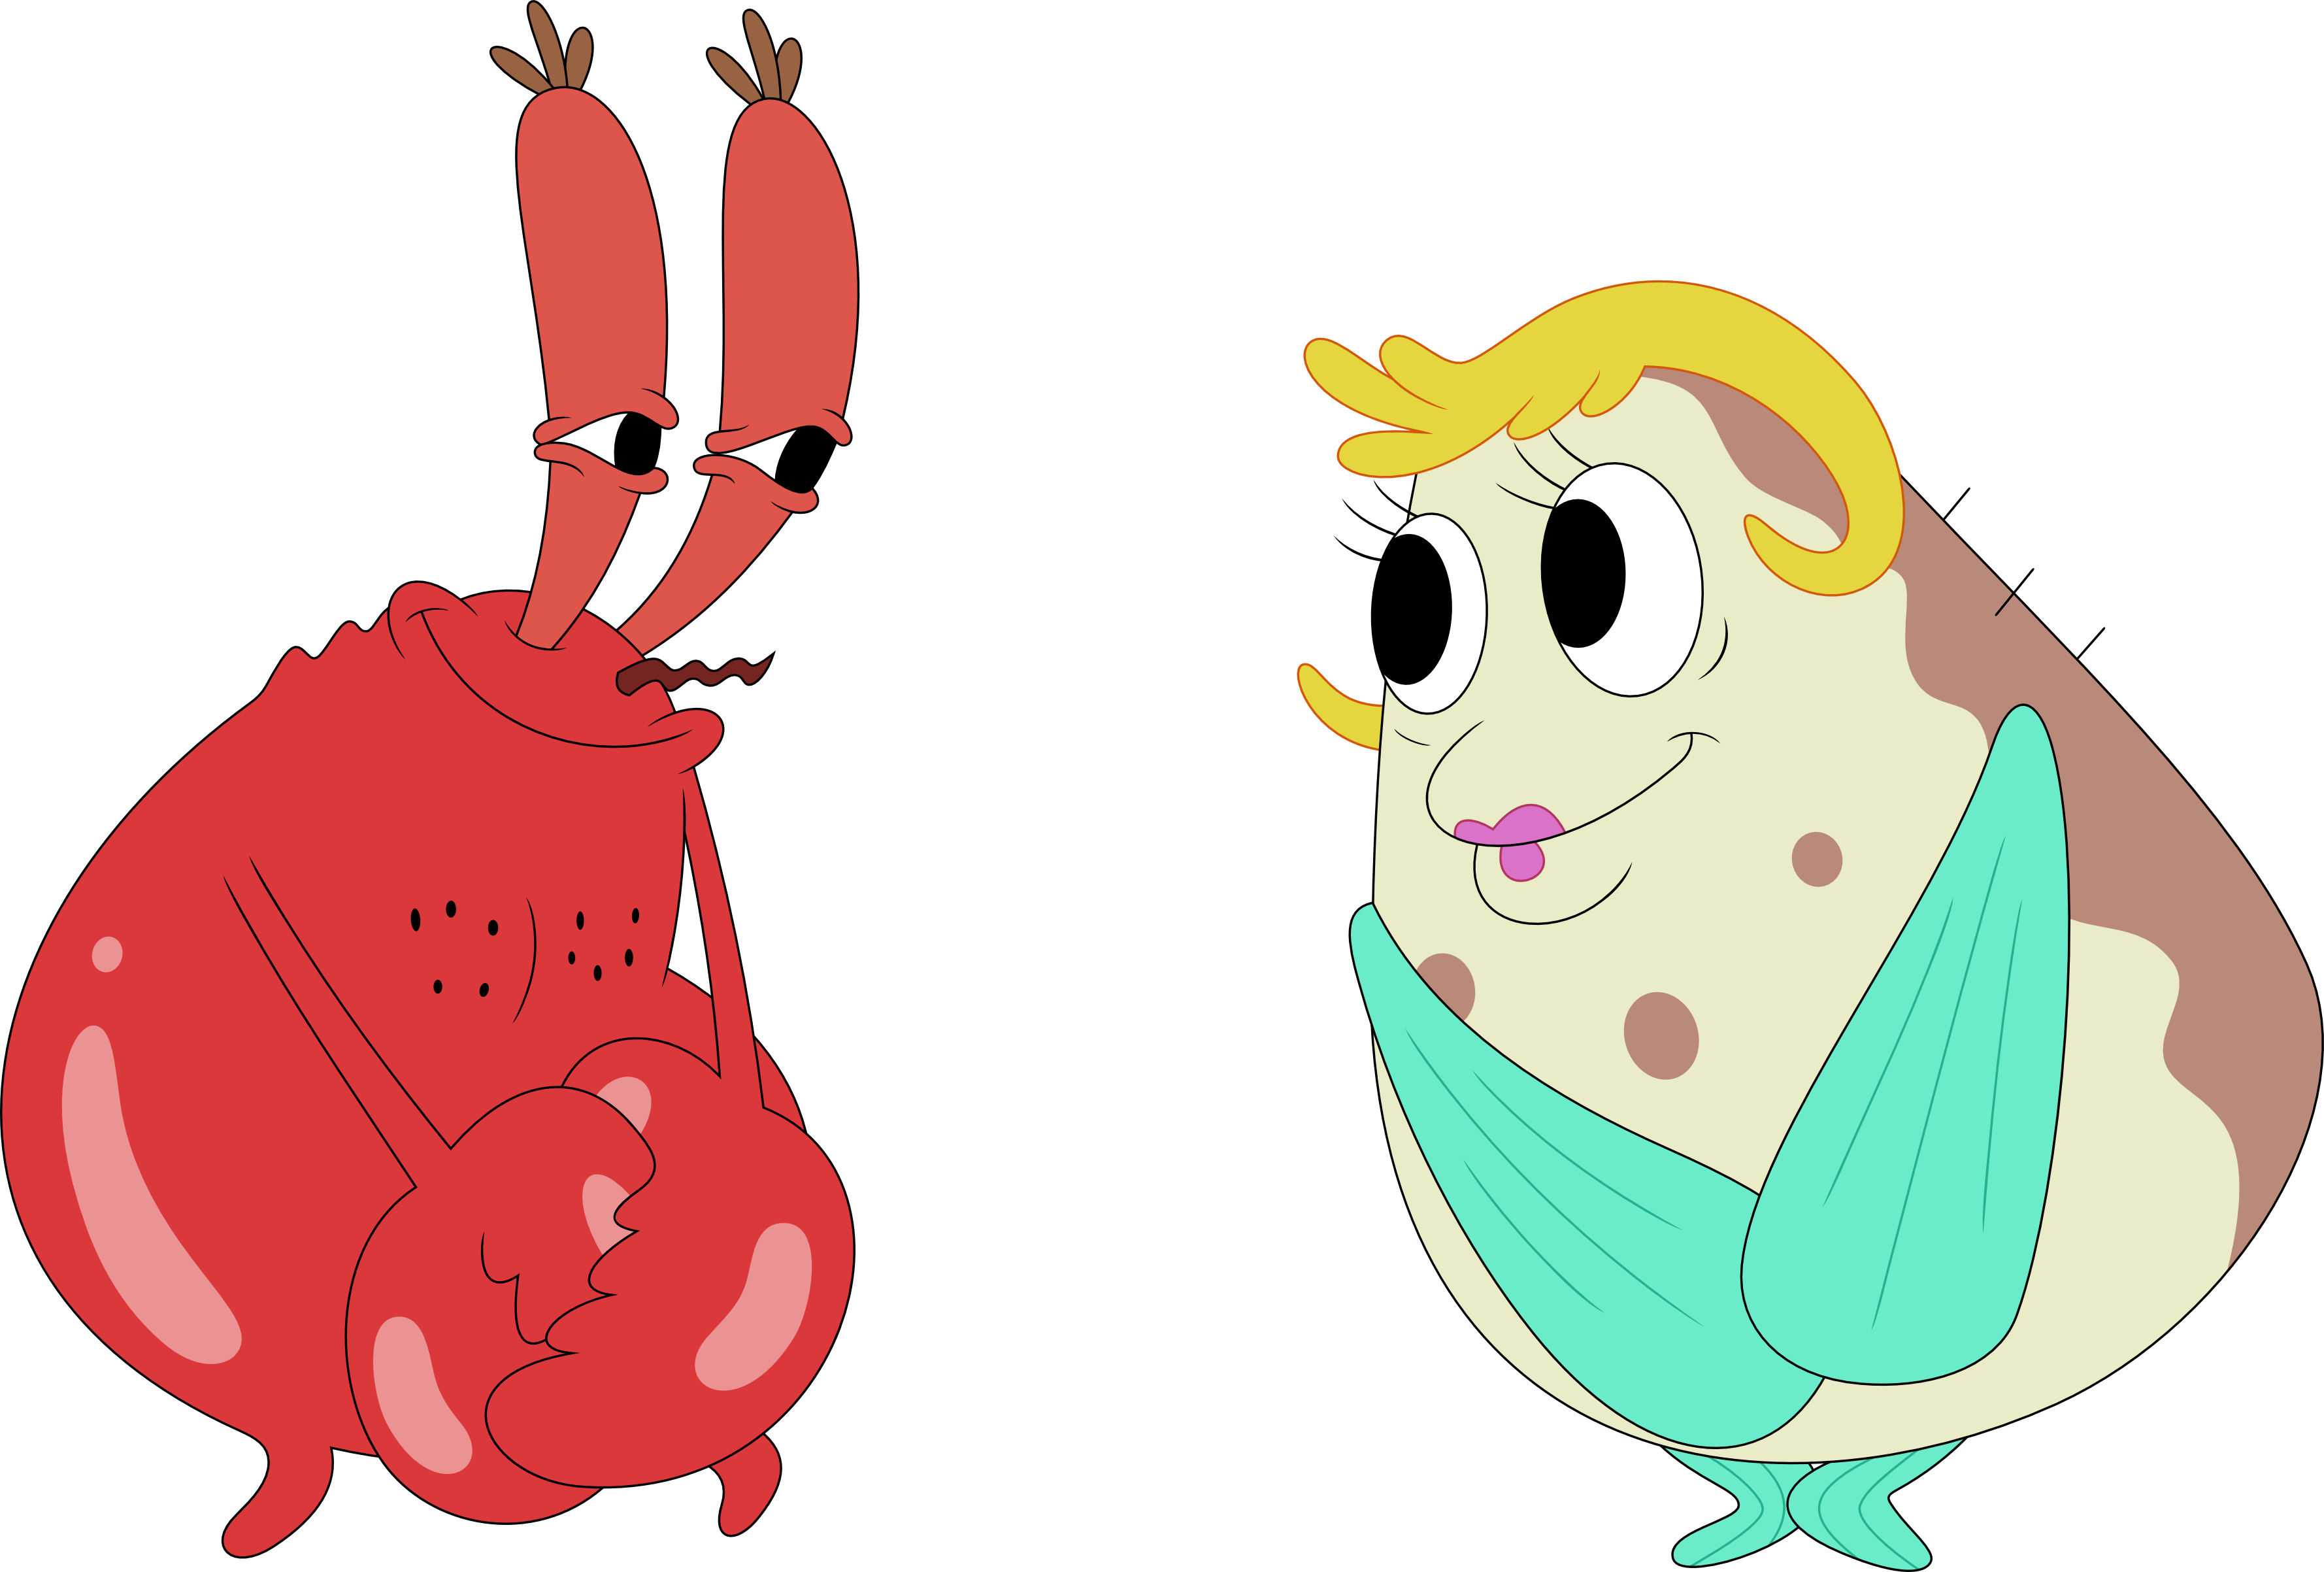 They Make A Cute Naked Couple By Porygon2z - Mr Krabs And Mrs Puff - (3556x...